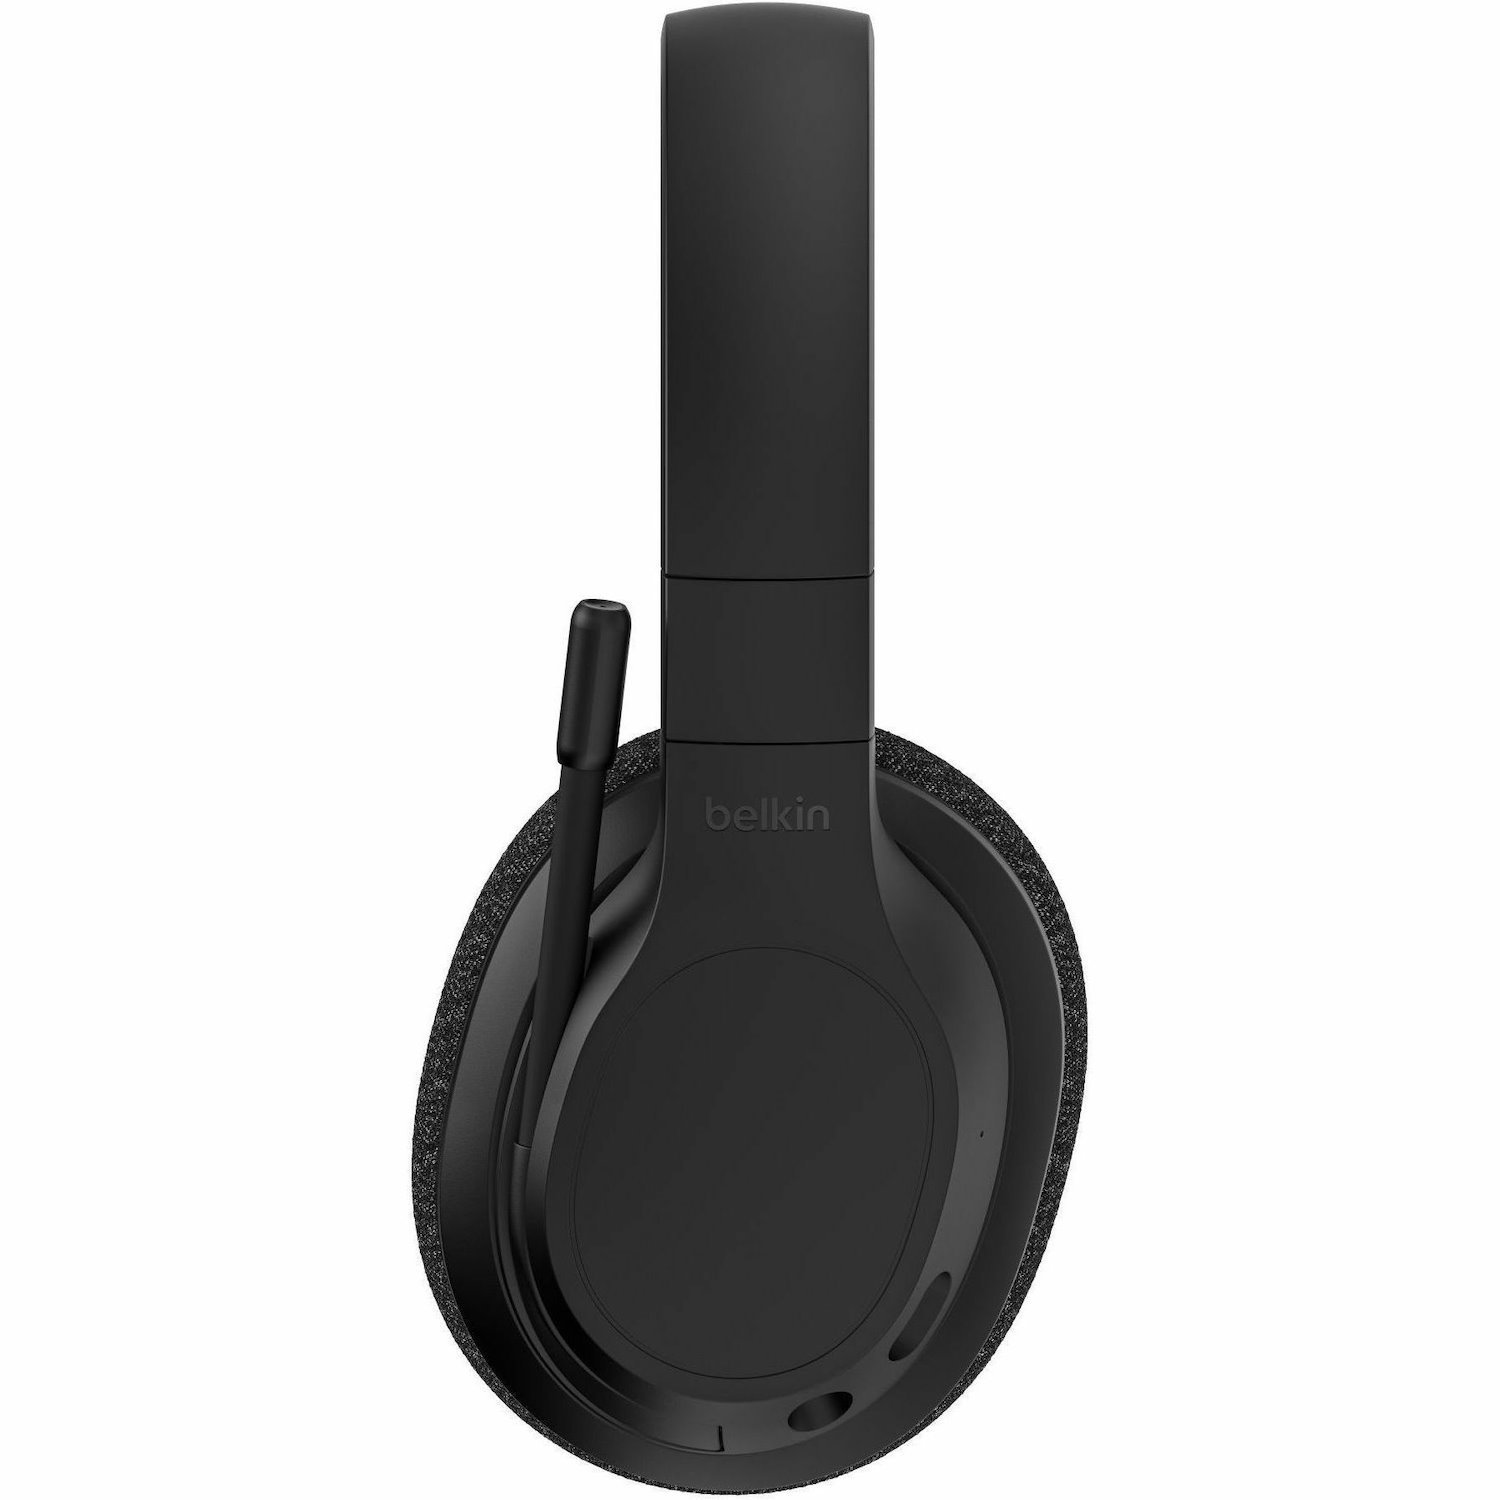 Belkin SoundForm Adapt Wireless Over-Ear Headset, Headphones for Work, Play, Gaming, & Travel with Built-in Boom Microphone - Compatible with iPhone, iPad, Galaxy, and More - Black